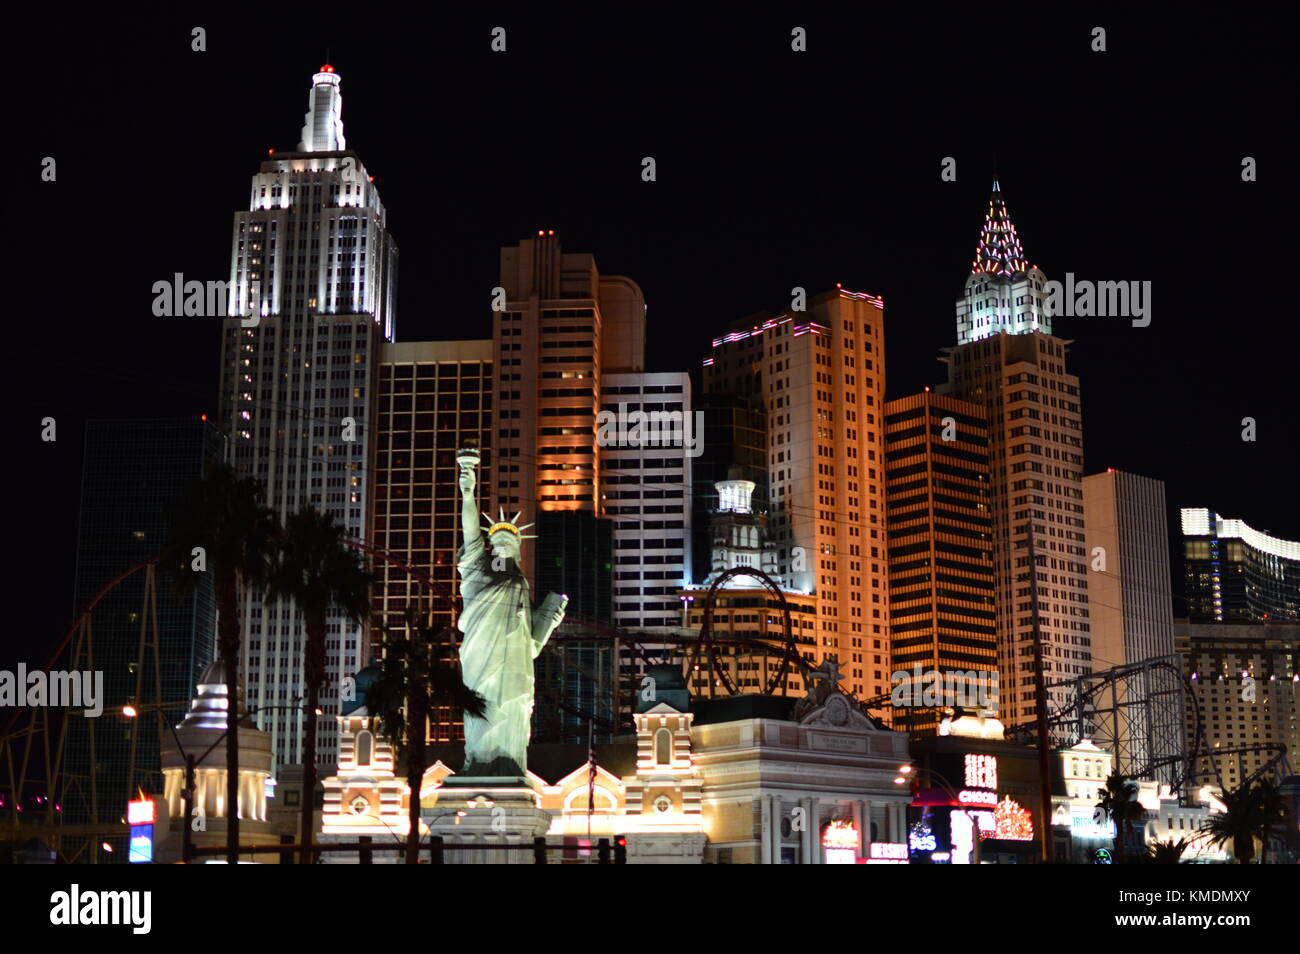 New York New York hotel, casino with fake statue of liberty. Big casino's on the world famous Las Vegas Strip, Nevada, United States of America. Stock Photo